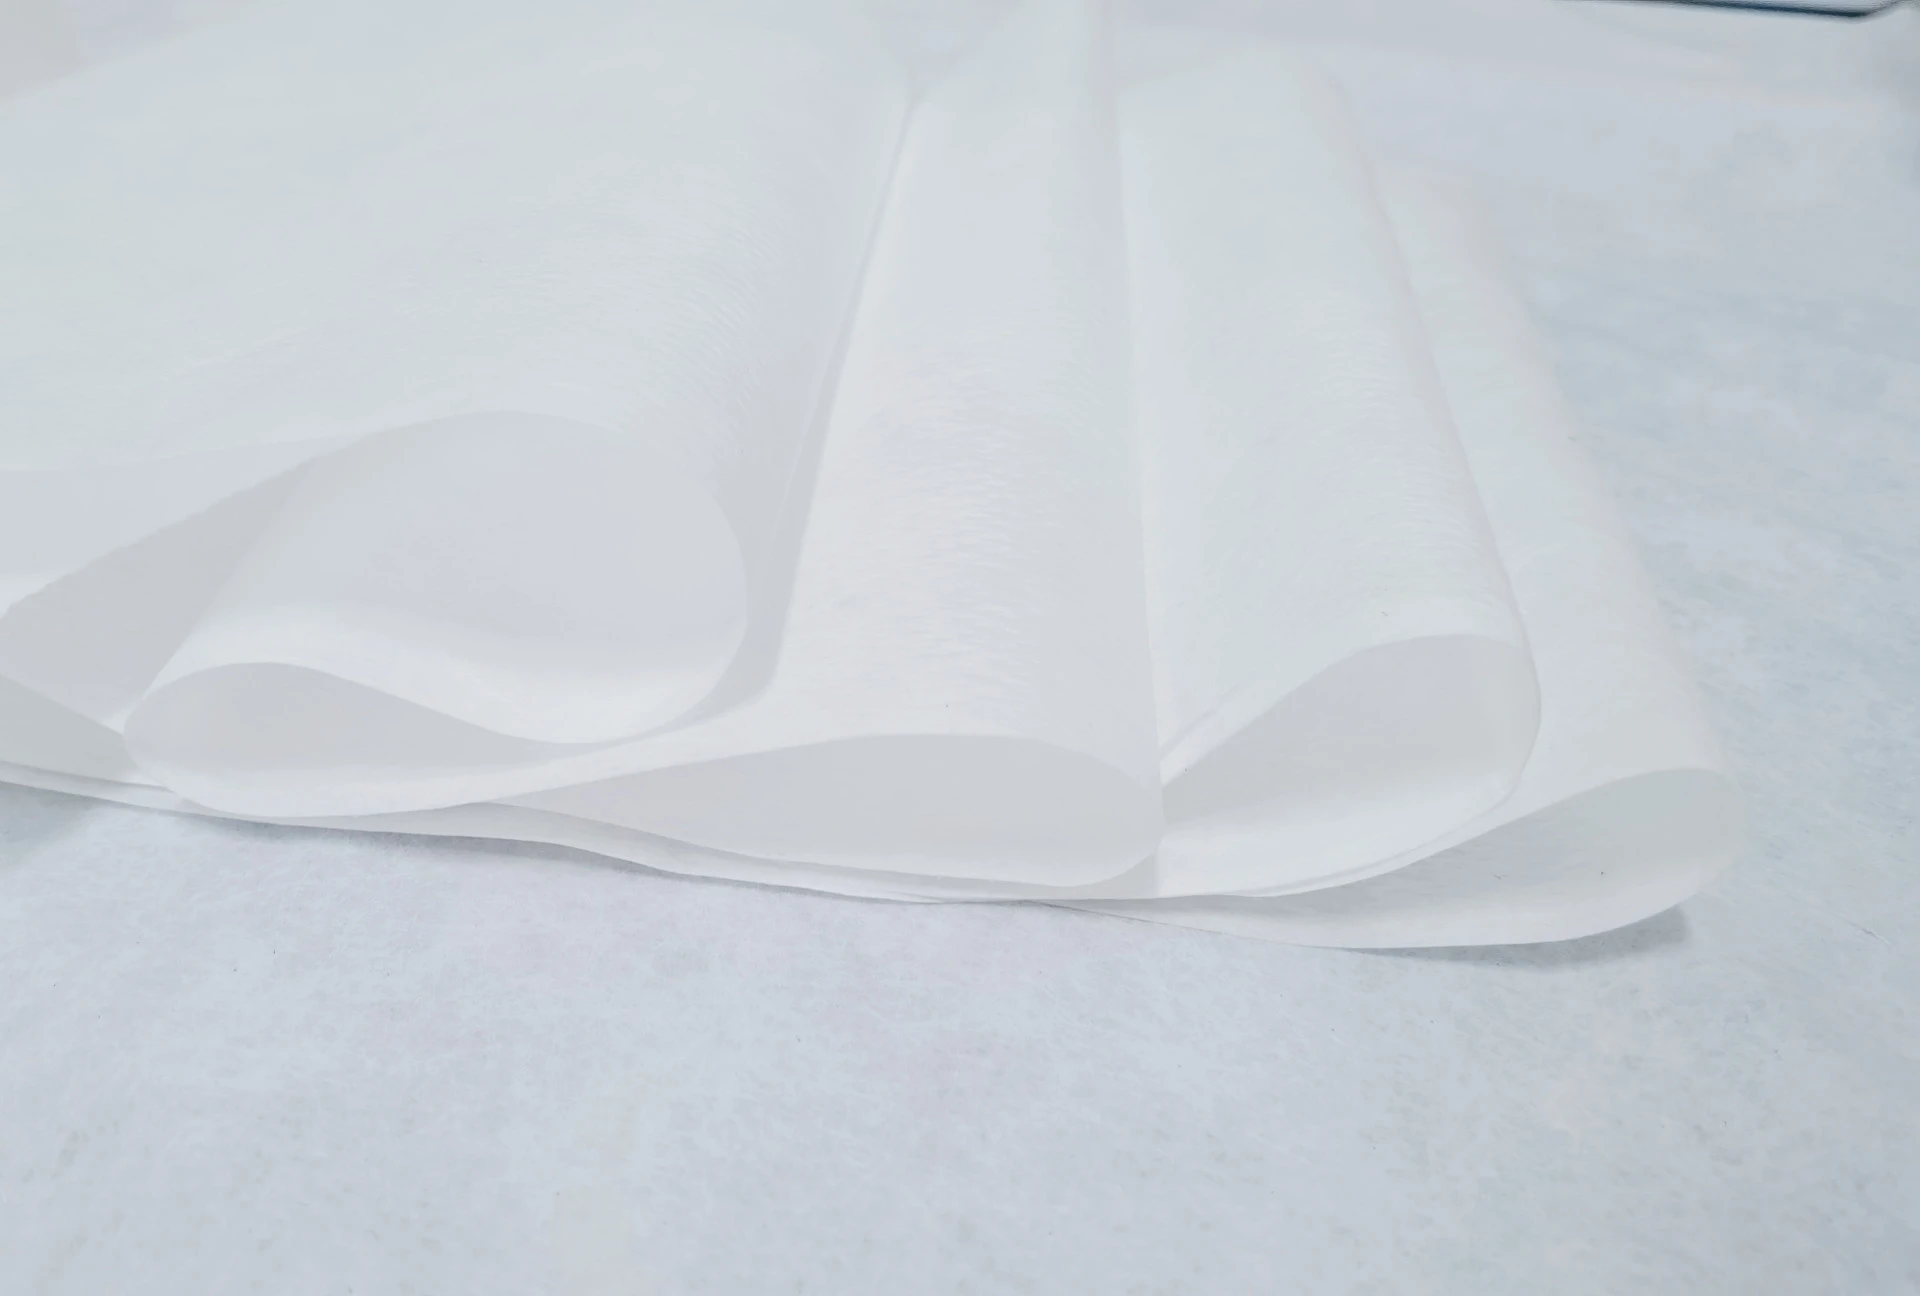 Finely Processed Spunbond Hydrophilic 100% Polypropylene Melt Blown Nonwoven Fabric